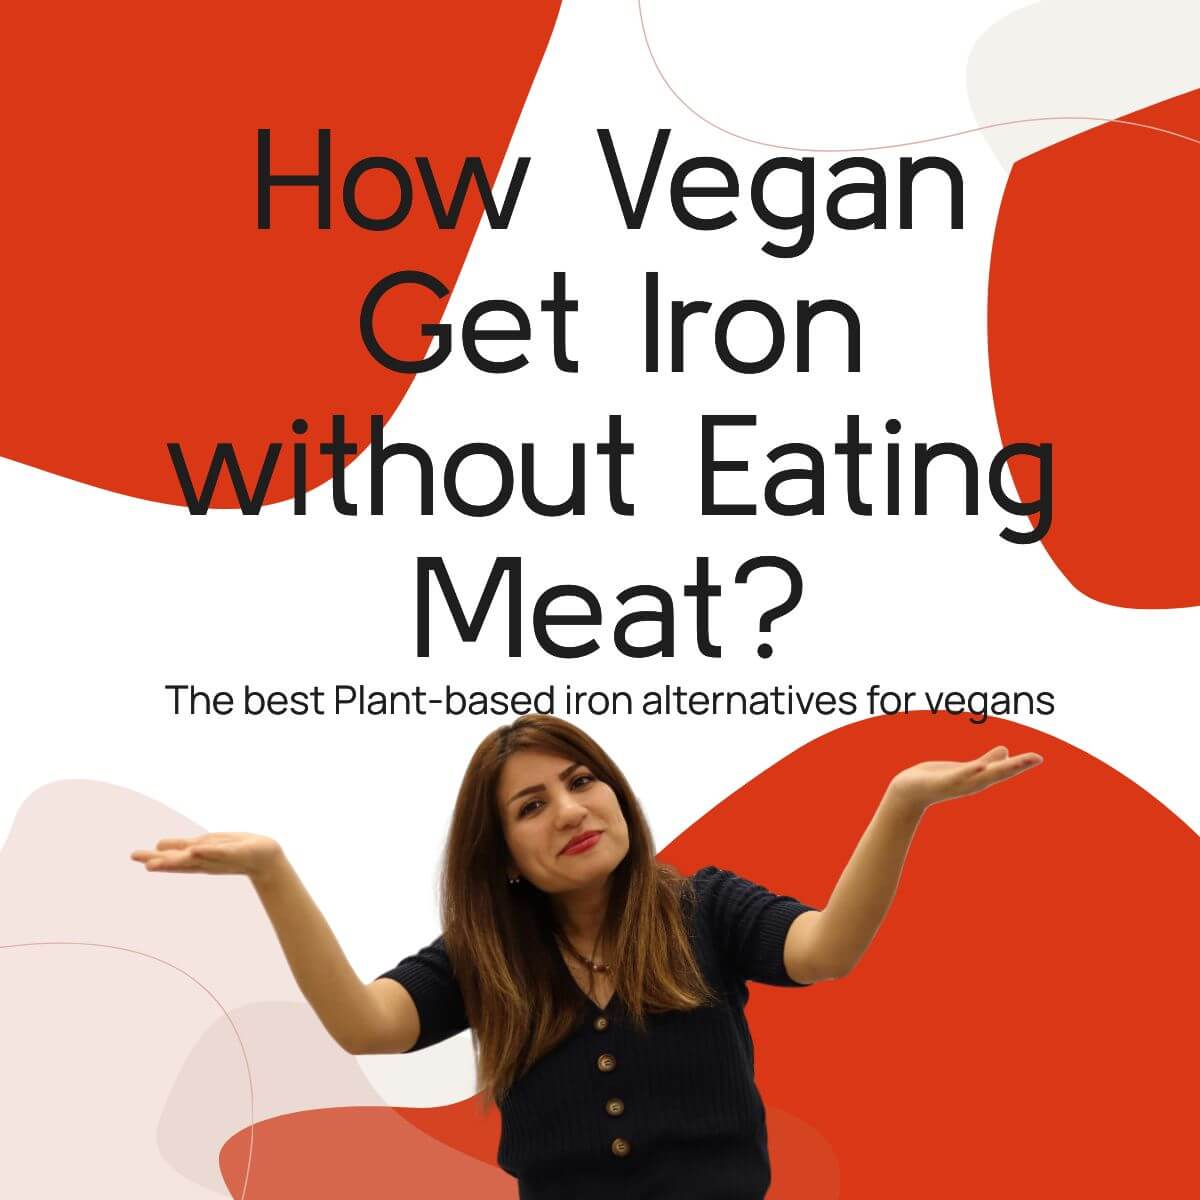 How Vegan Get Ironwithout Eating Meat?